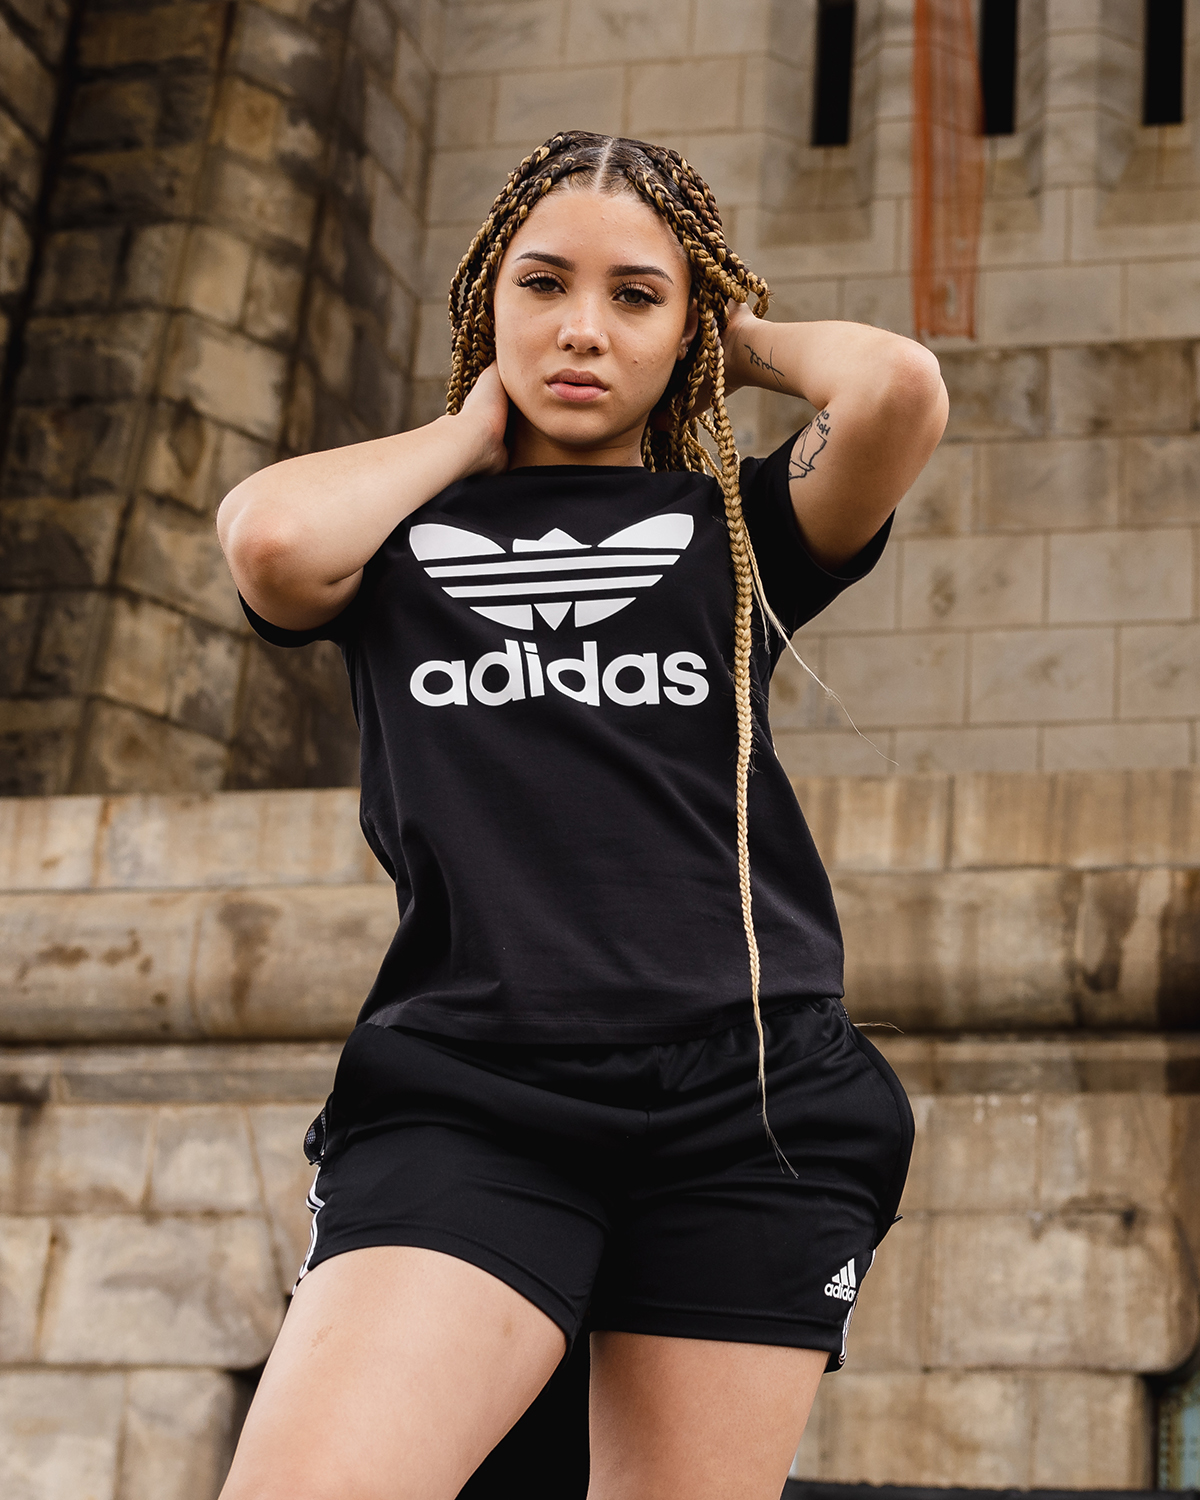 Pickering synder Blot DTLR on X: "All New Womens #Adidas Apparel! 🛒: https://t.co/YFCiggoVLU  https://t.co/RotzxNpZhp" / X